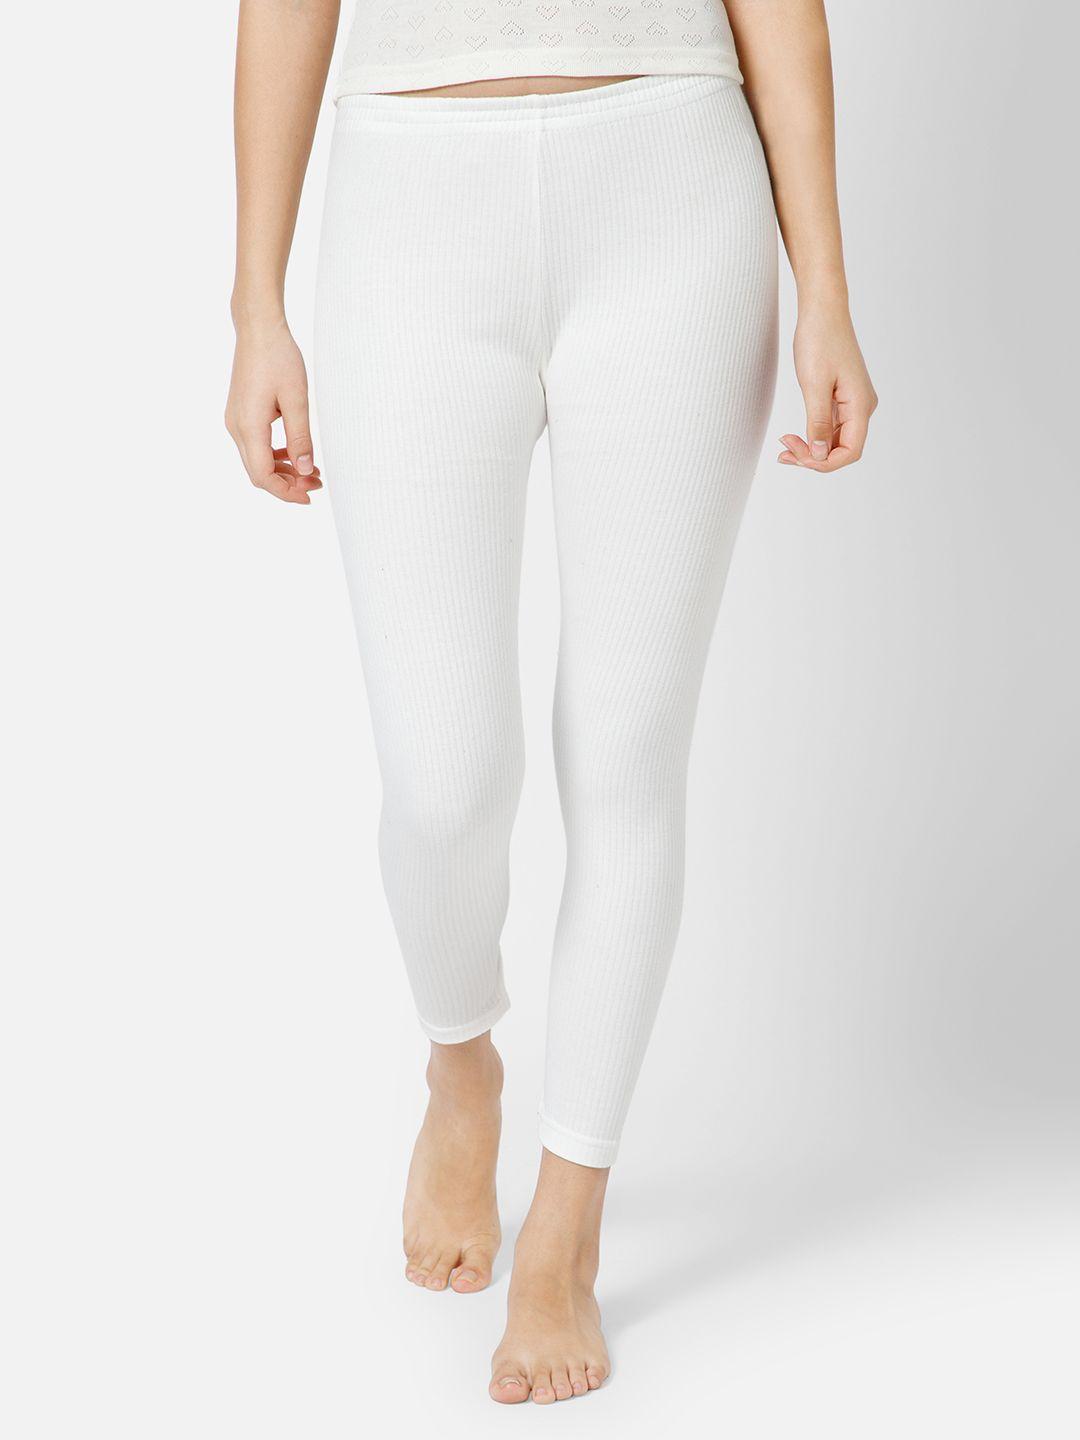 bodycare insider women off white solid thermal bottoms b202_105